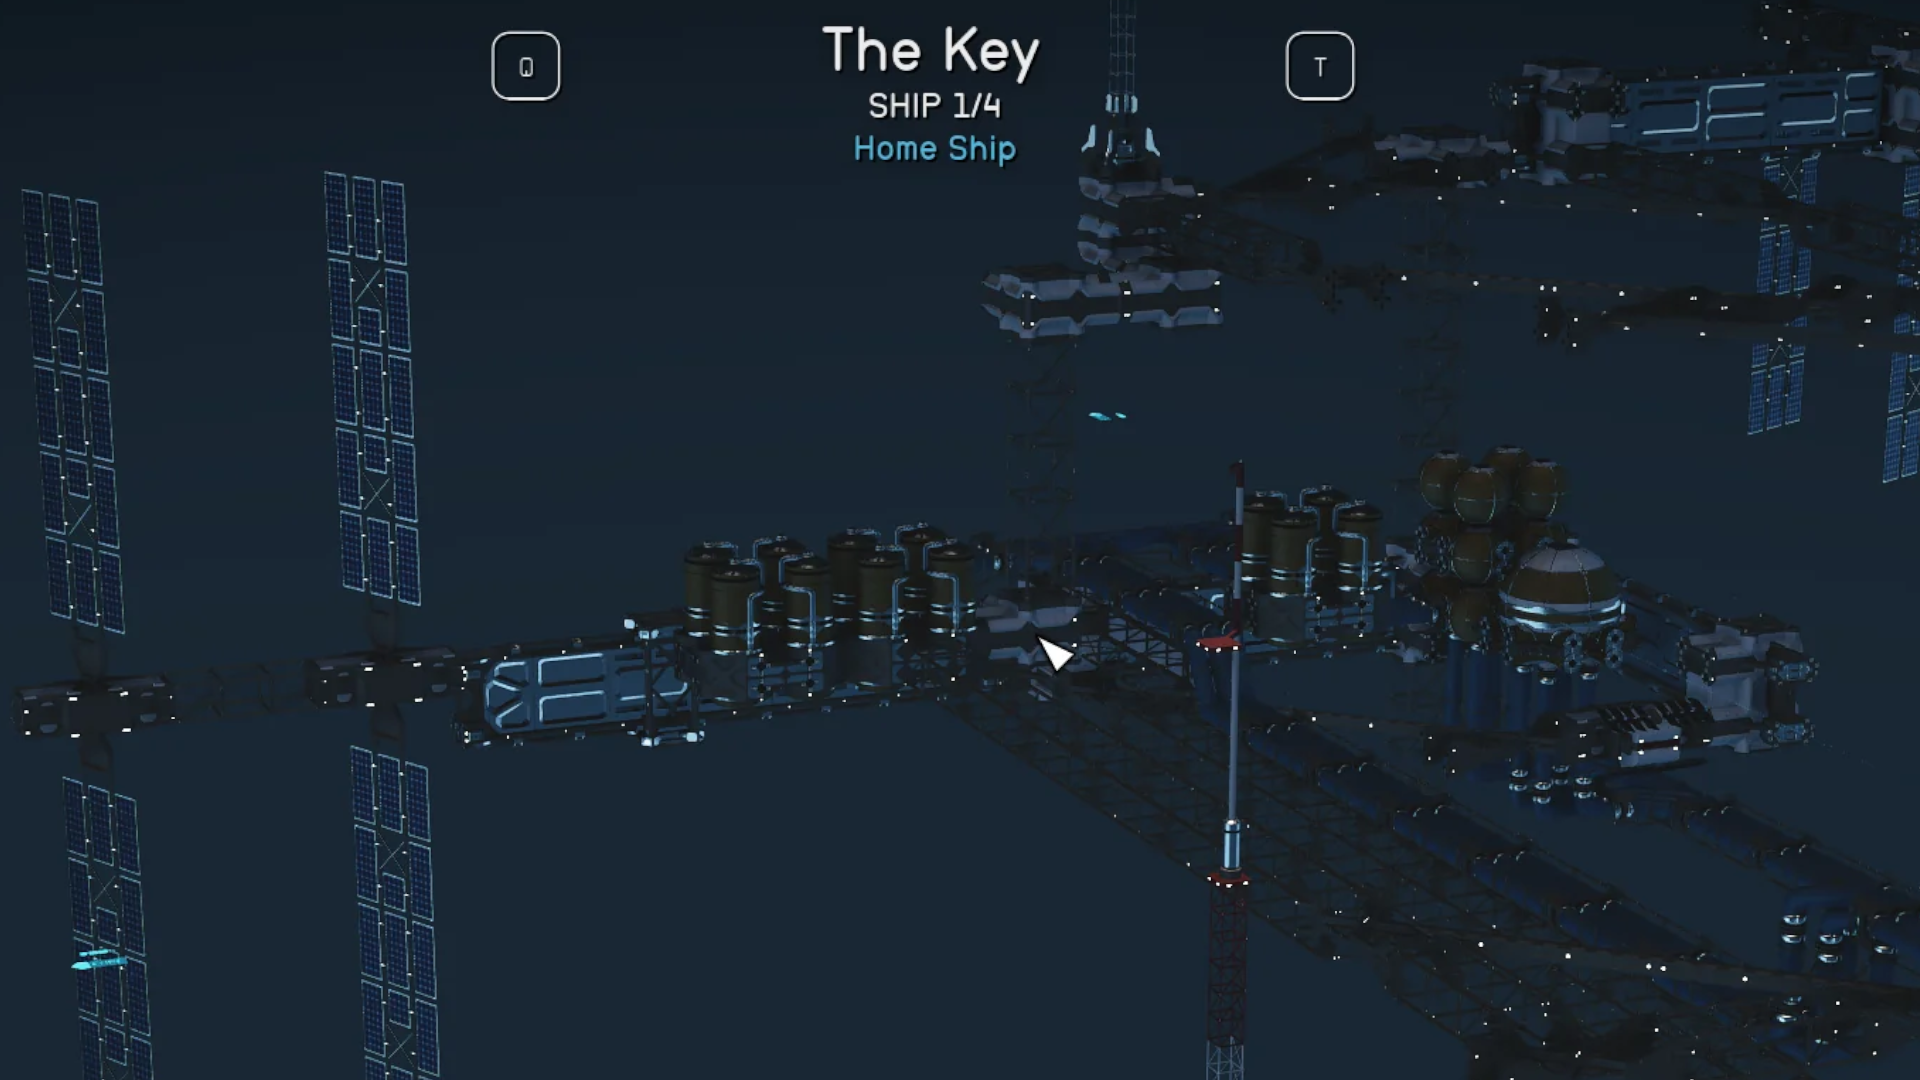 An image of The Key, a massive space station, which should not be usable as a ship in Starfield, but somehow is.